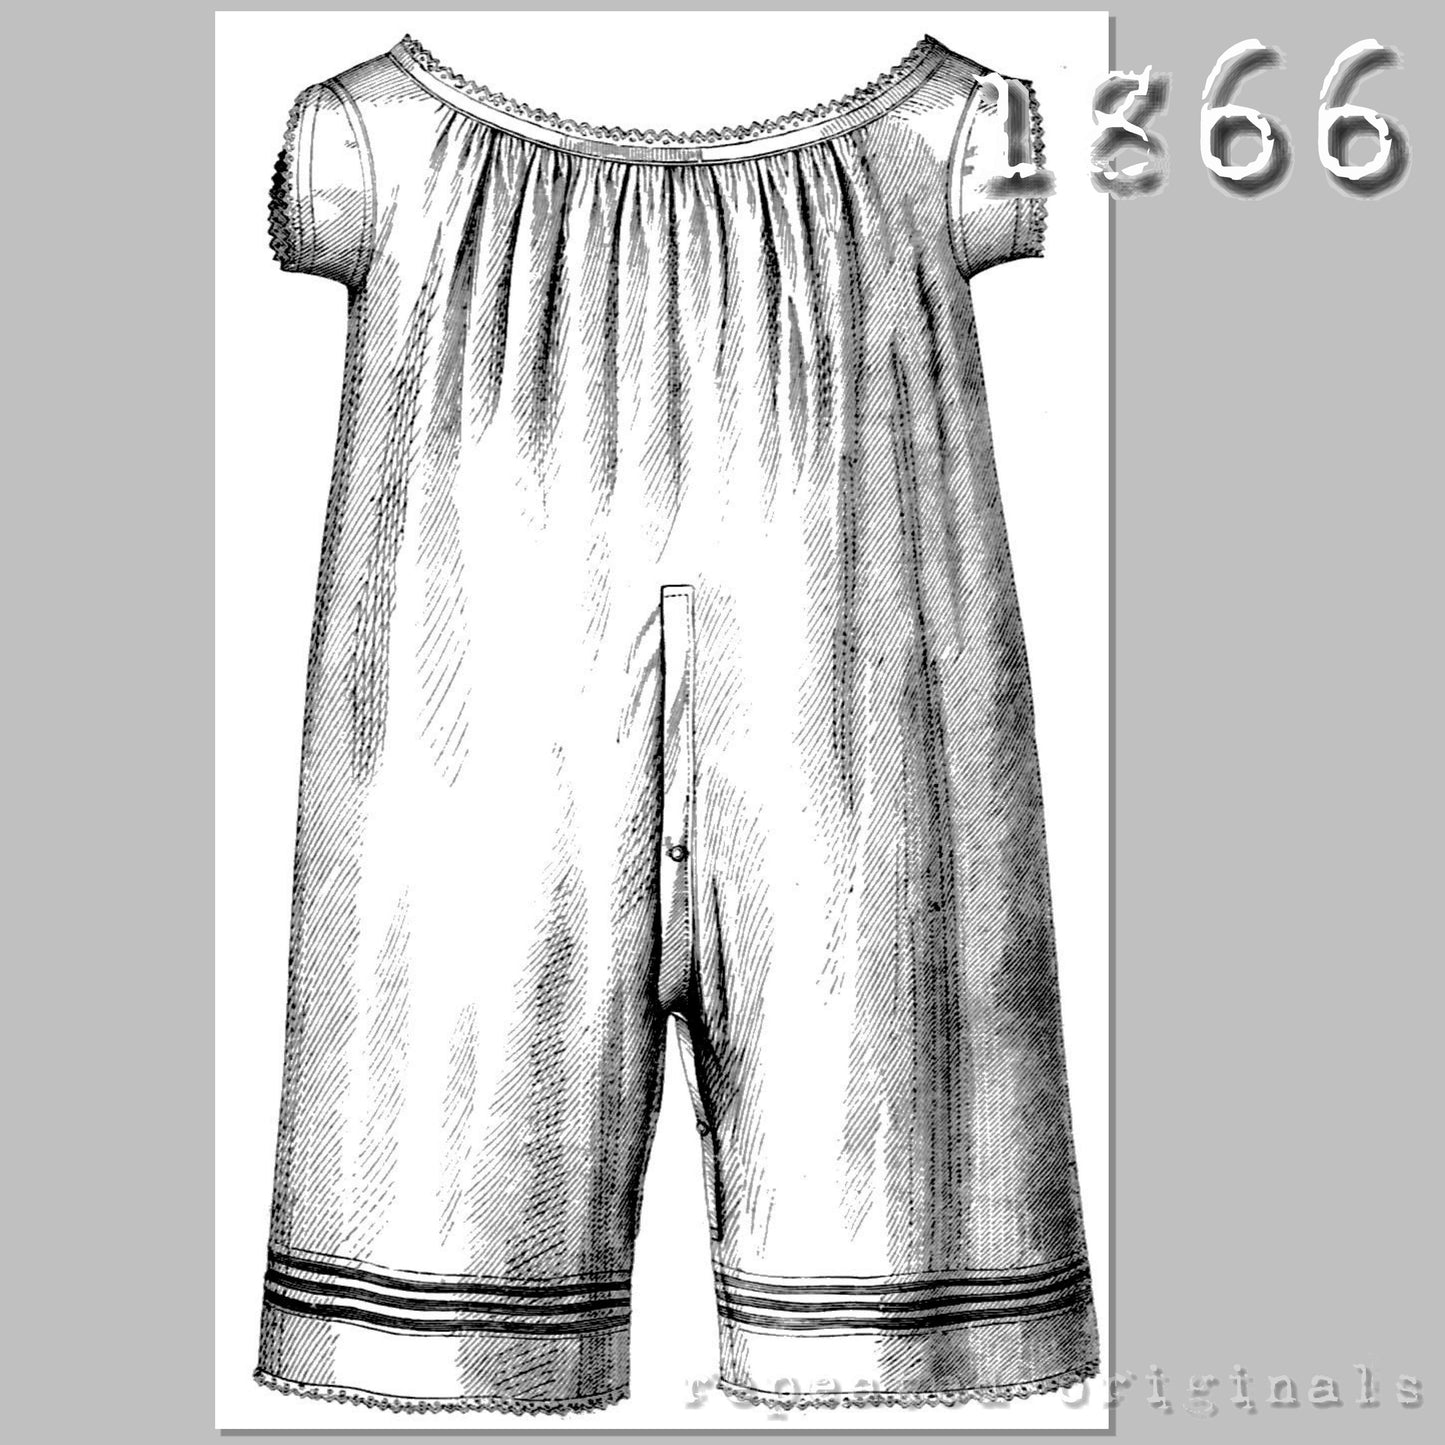 1866 Ladies' Chemise and Drawers Combination Sewing Pattern - INSTANT DOWNLOAD PDF